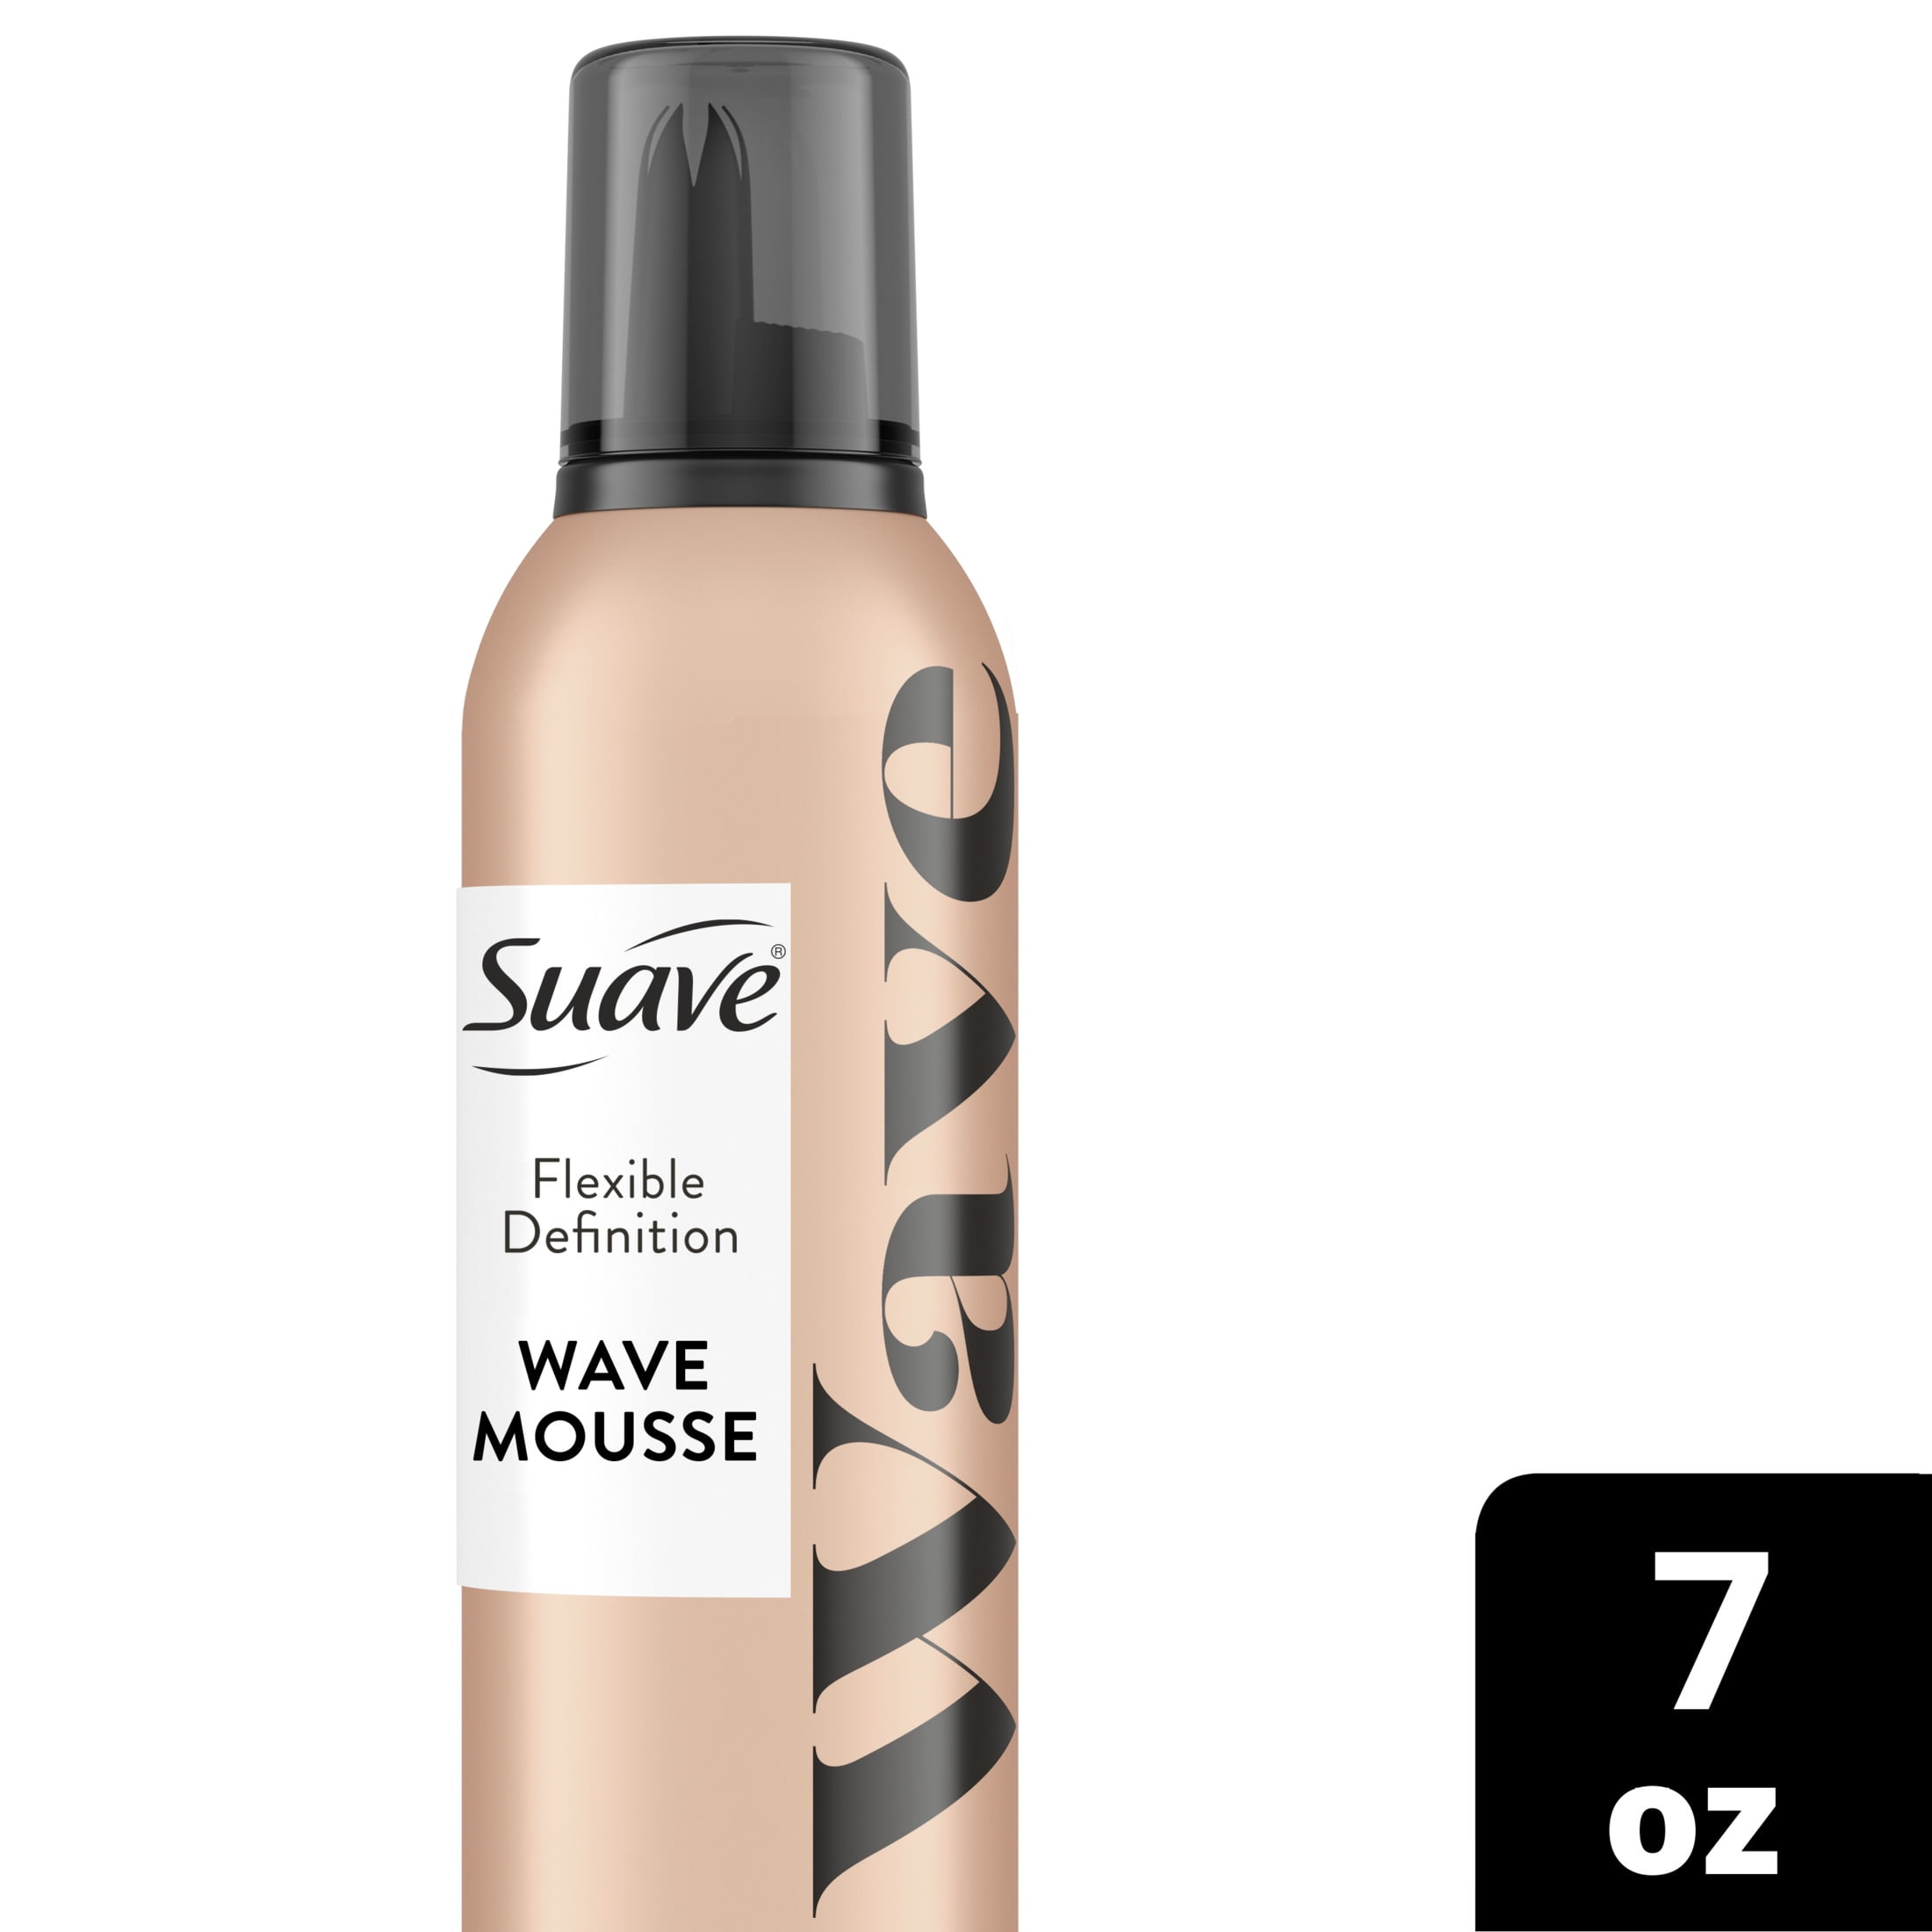 Suave Simply Styled Wave Mousse Lightweight Hair Mousse Locks in Moisture for Crunch Free Curls, 7oz